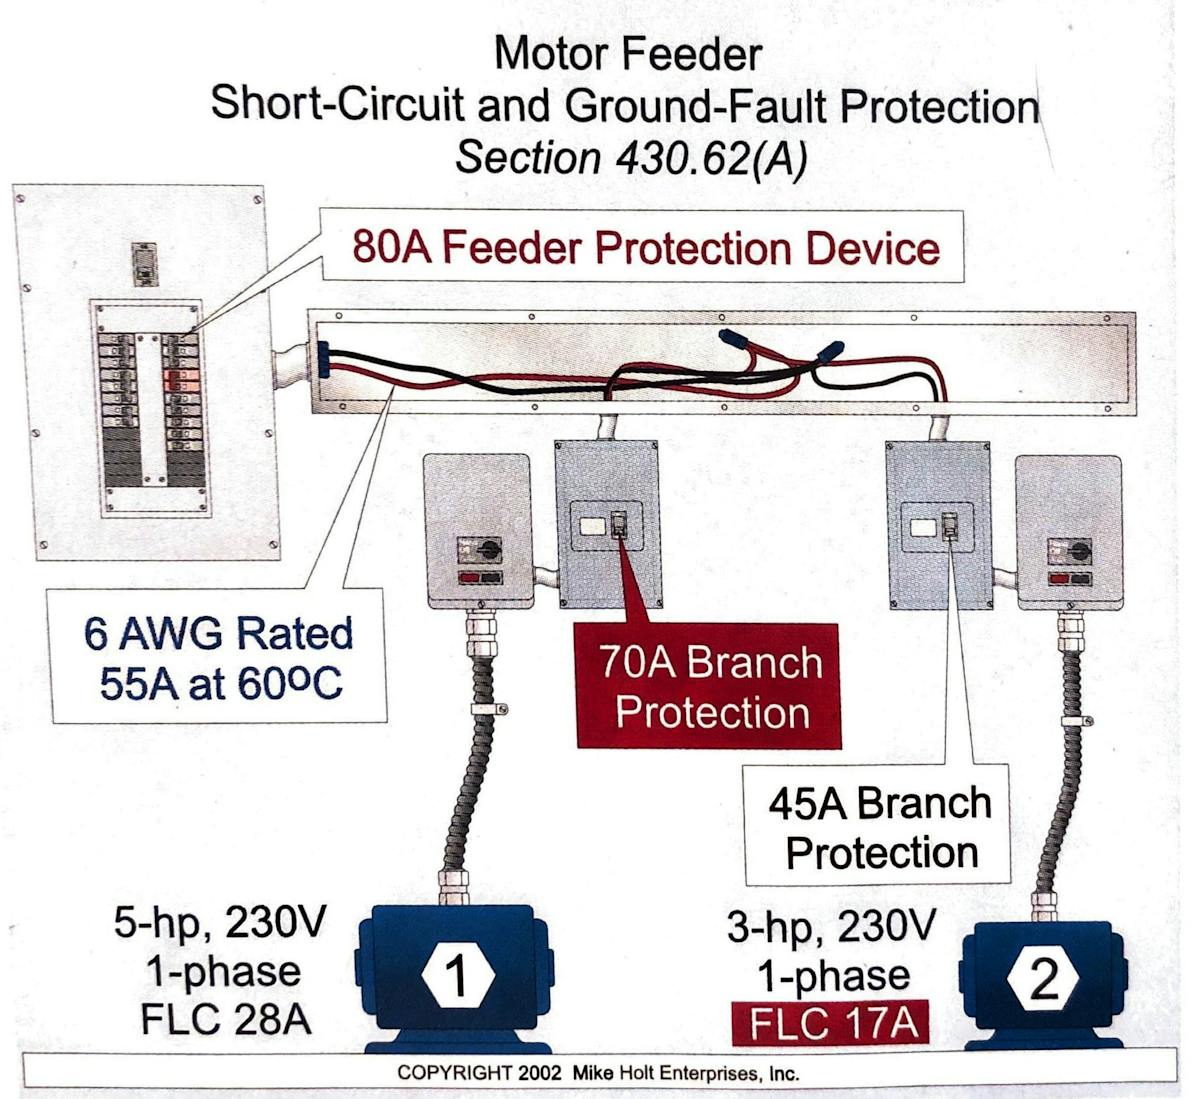 Fig. 5. In this example, the largest branch-circuit fuse or circuit breaker allowed for Motor 1 is 70A.